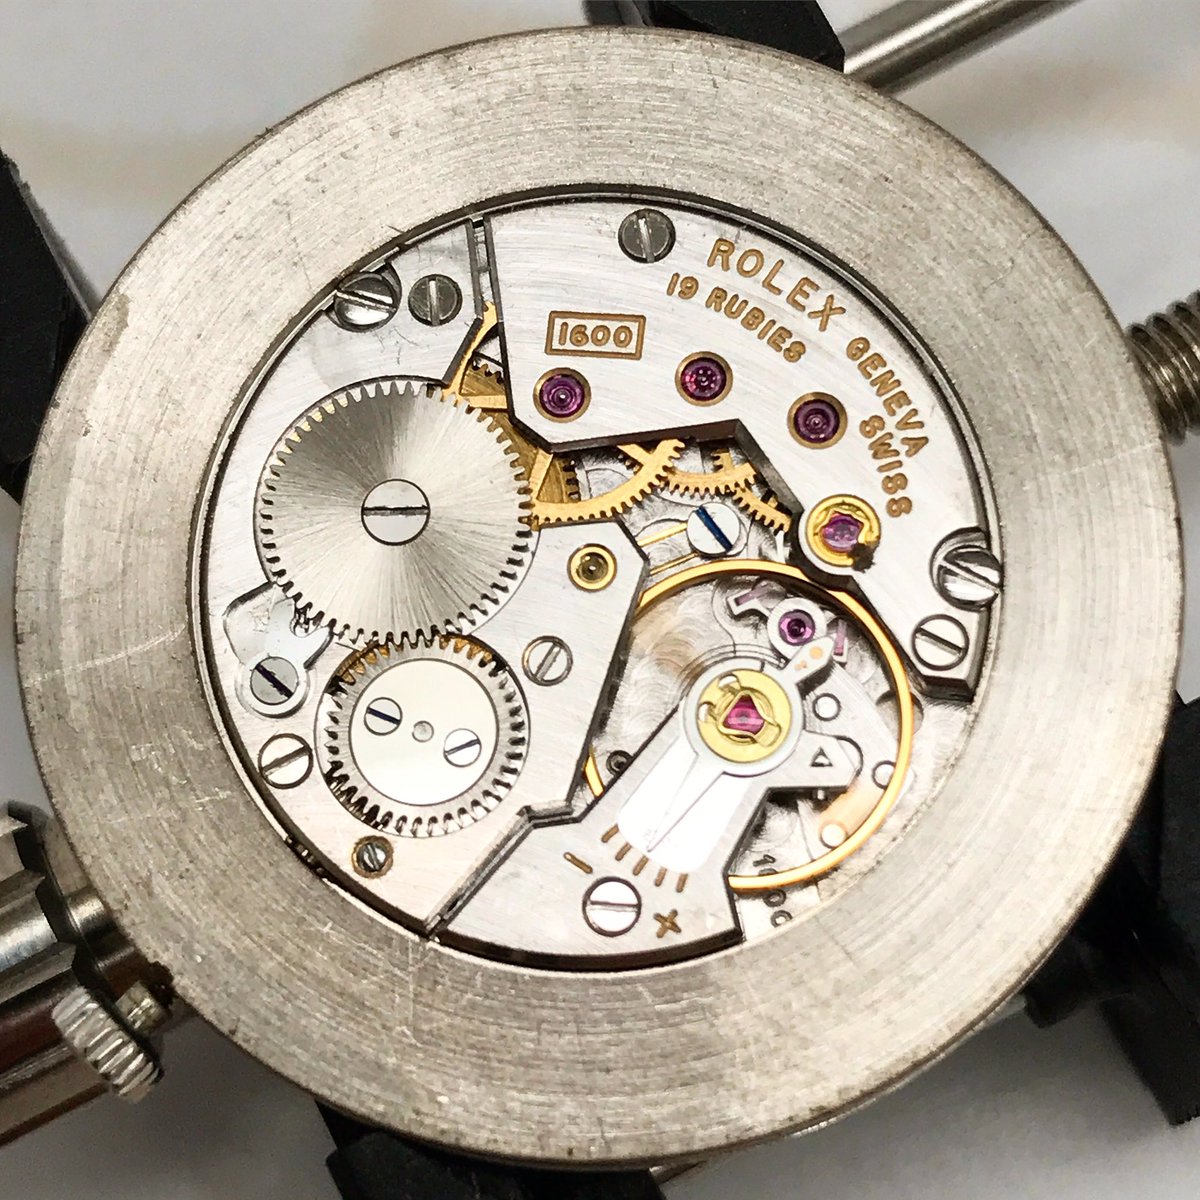 Manhattan Time on Twitter: Rolex 1600 manual widning movement, 1960s watchmaking #overhaul at @ProWatchRepair https://t.co/6jI9GW4fBU https://t.co/yC6E4w1Yf7" / Twitter